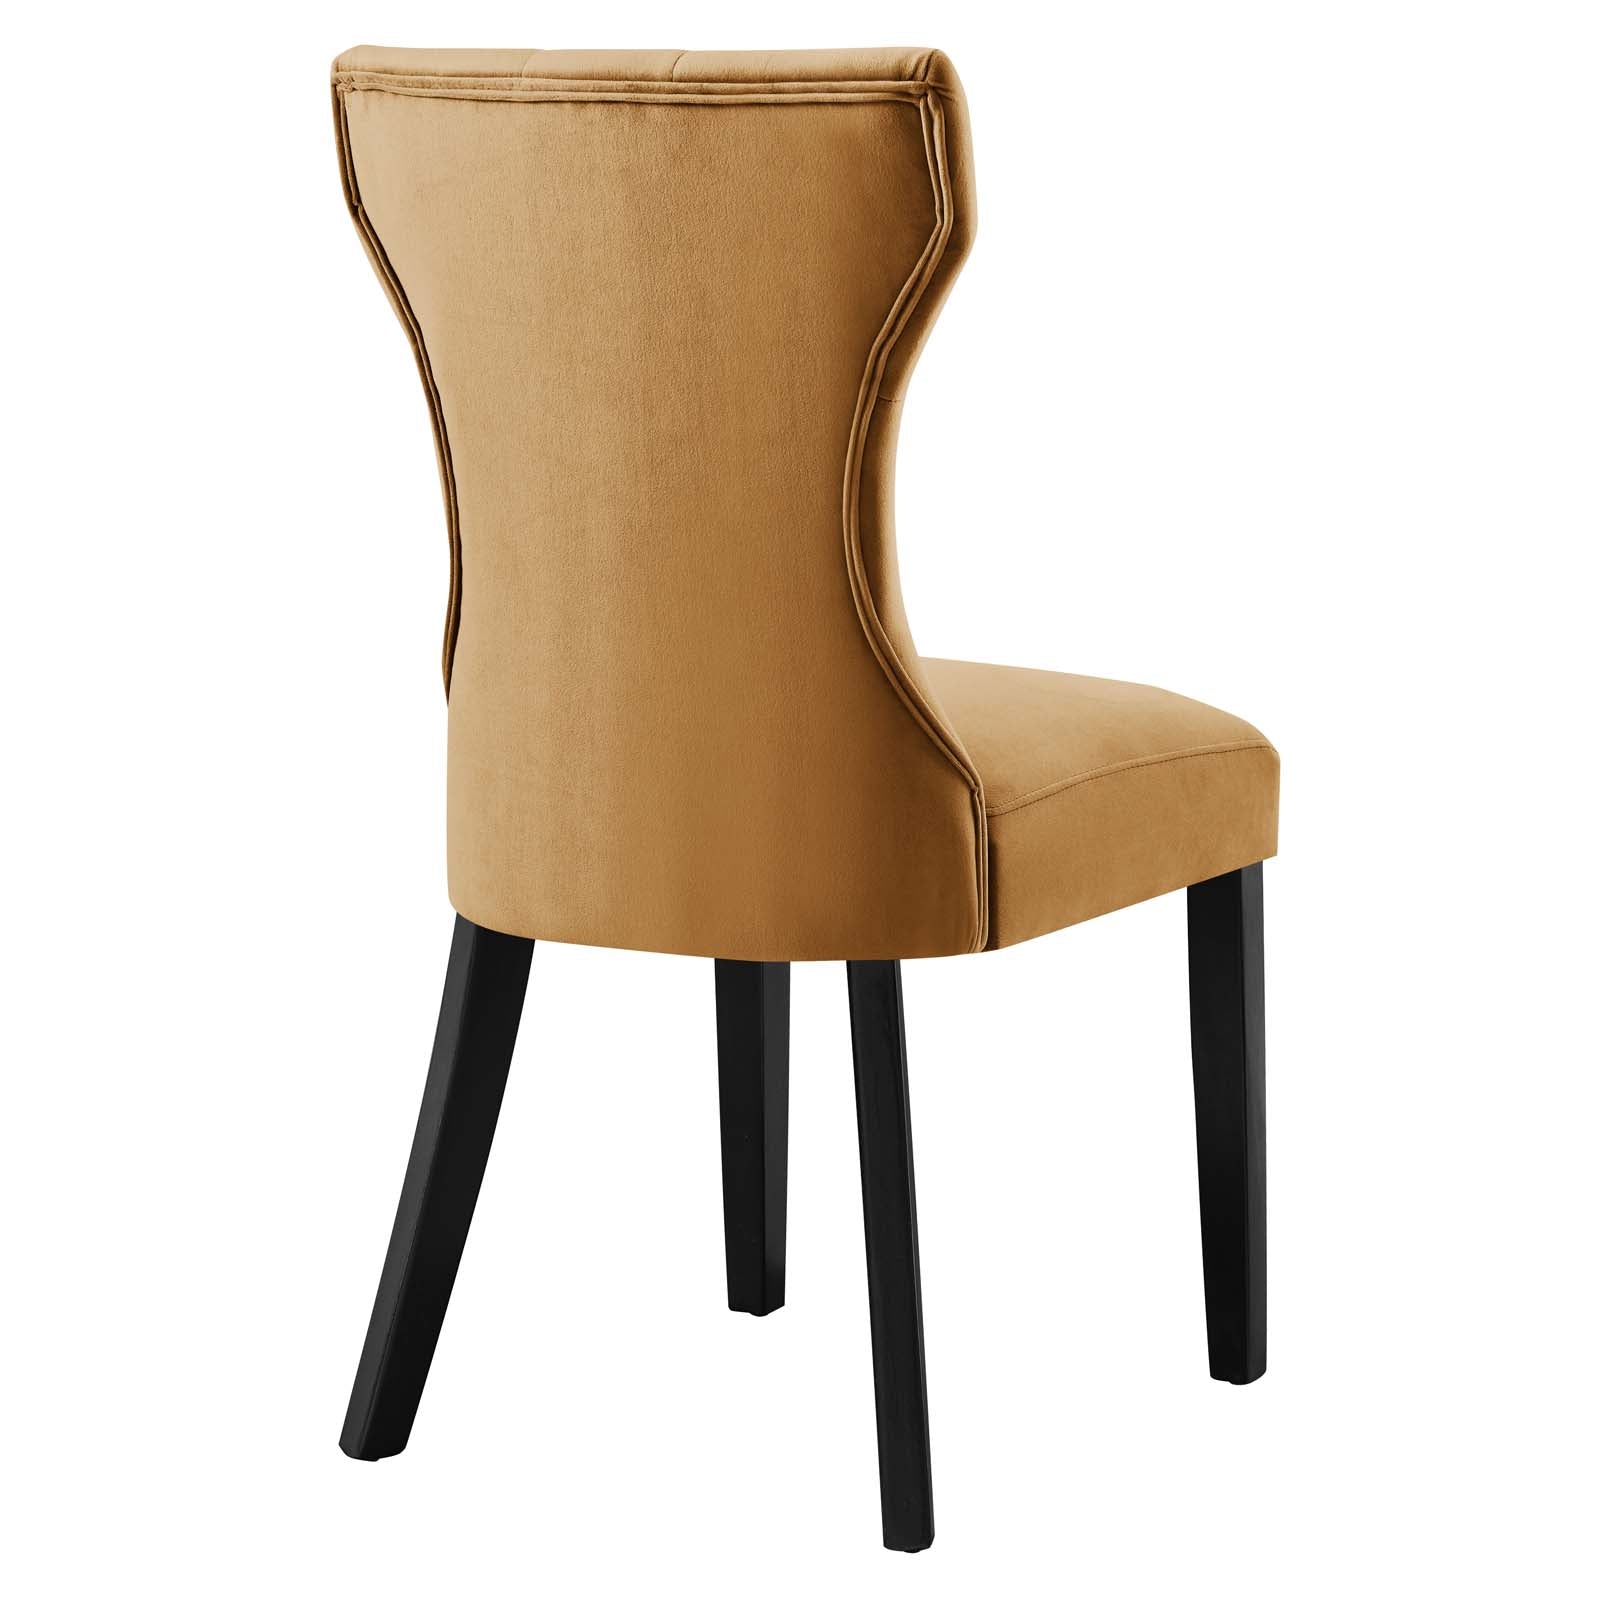 Modway Dining Chairs - Silhouette Performance Velvet Dining Chairs - Set of 2 Cognac